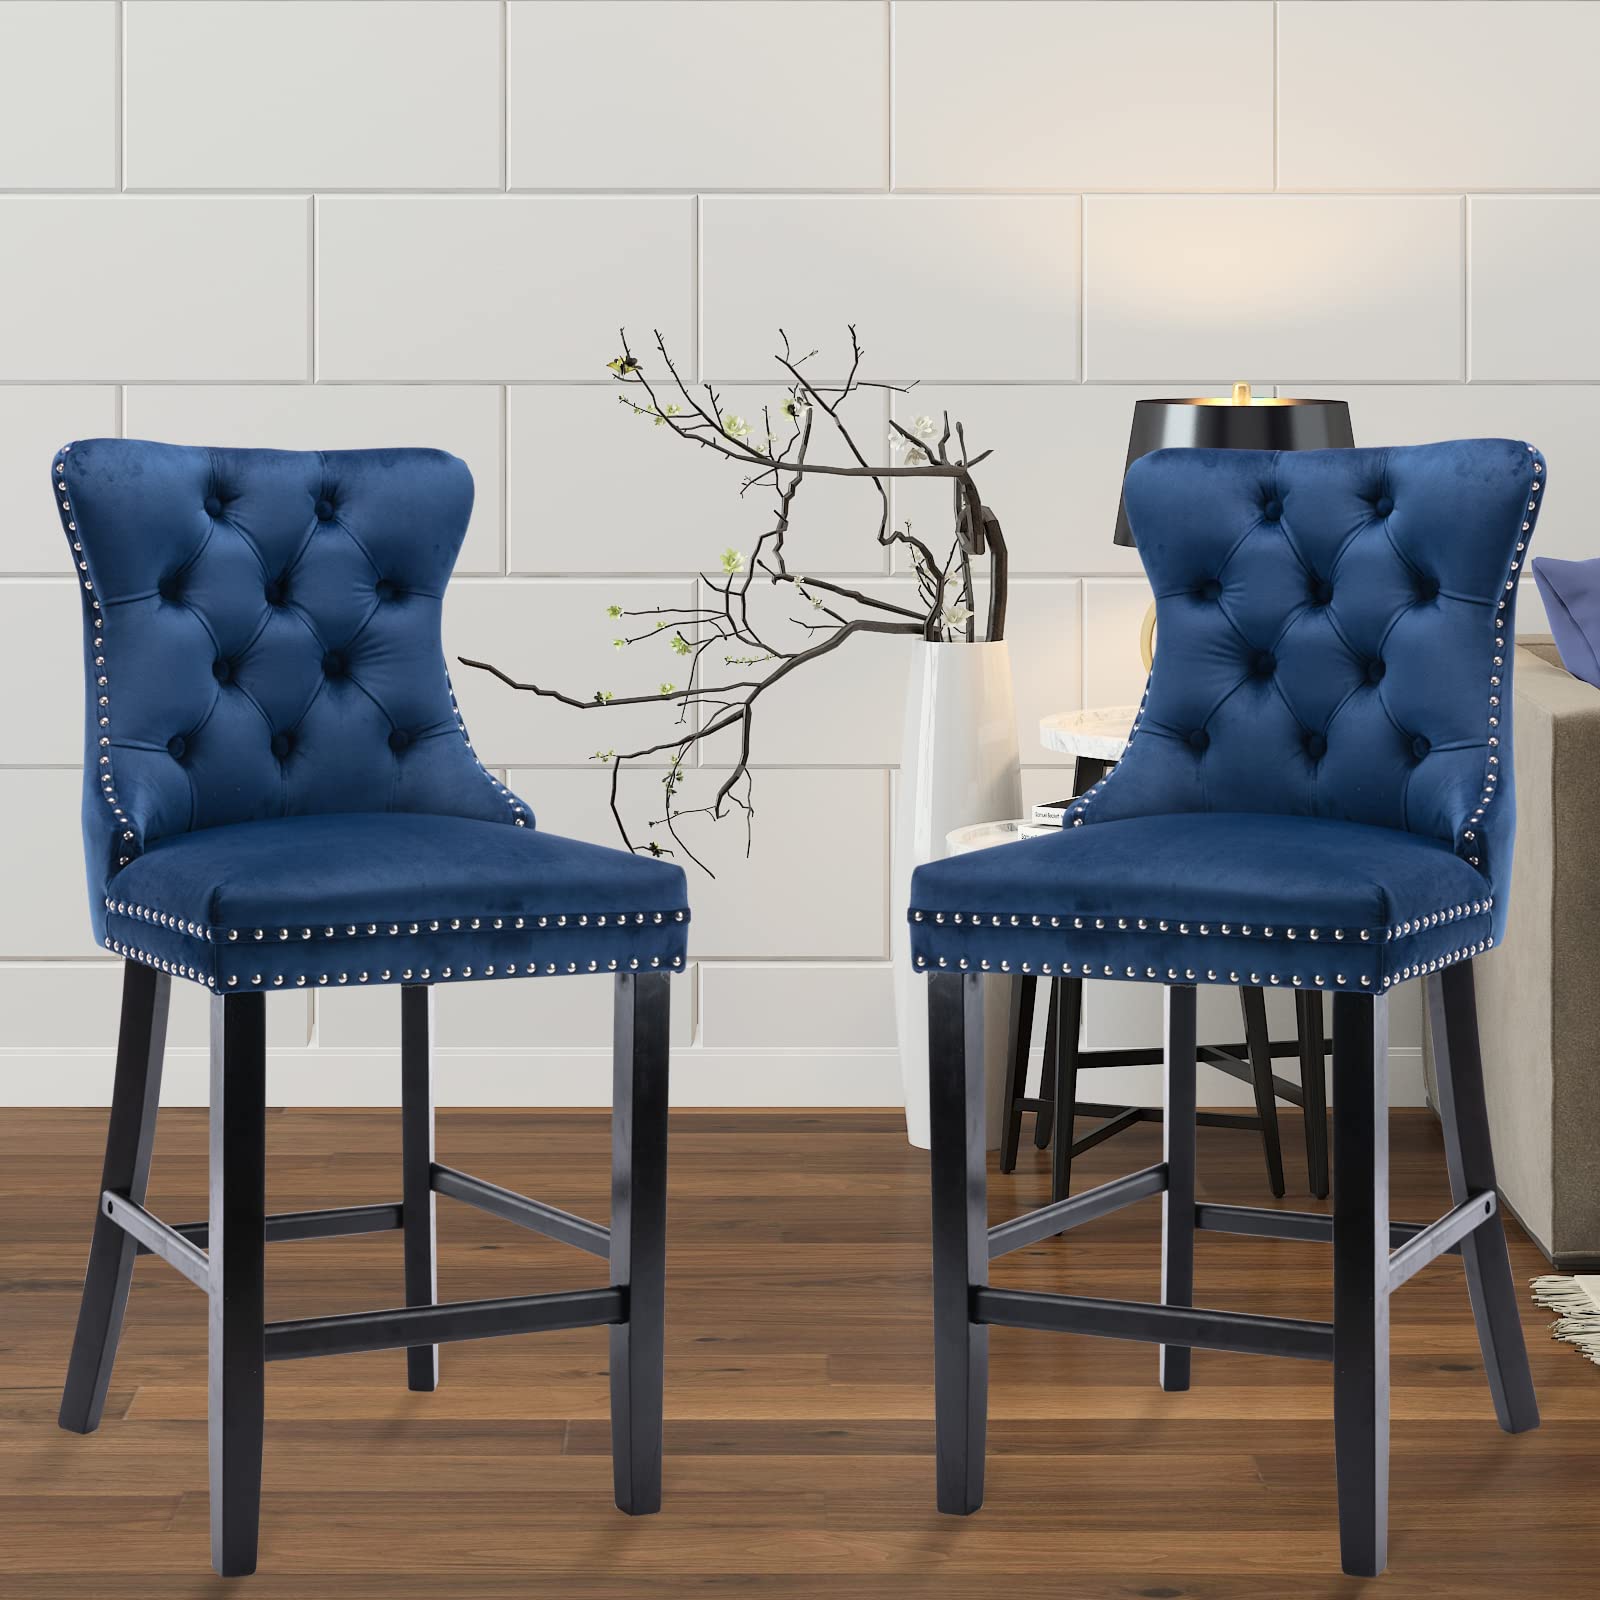 2X Velvet Bar Stools with Studs Trim Wooden Legs Tufted Dining Chairs Kitchen - image23